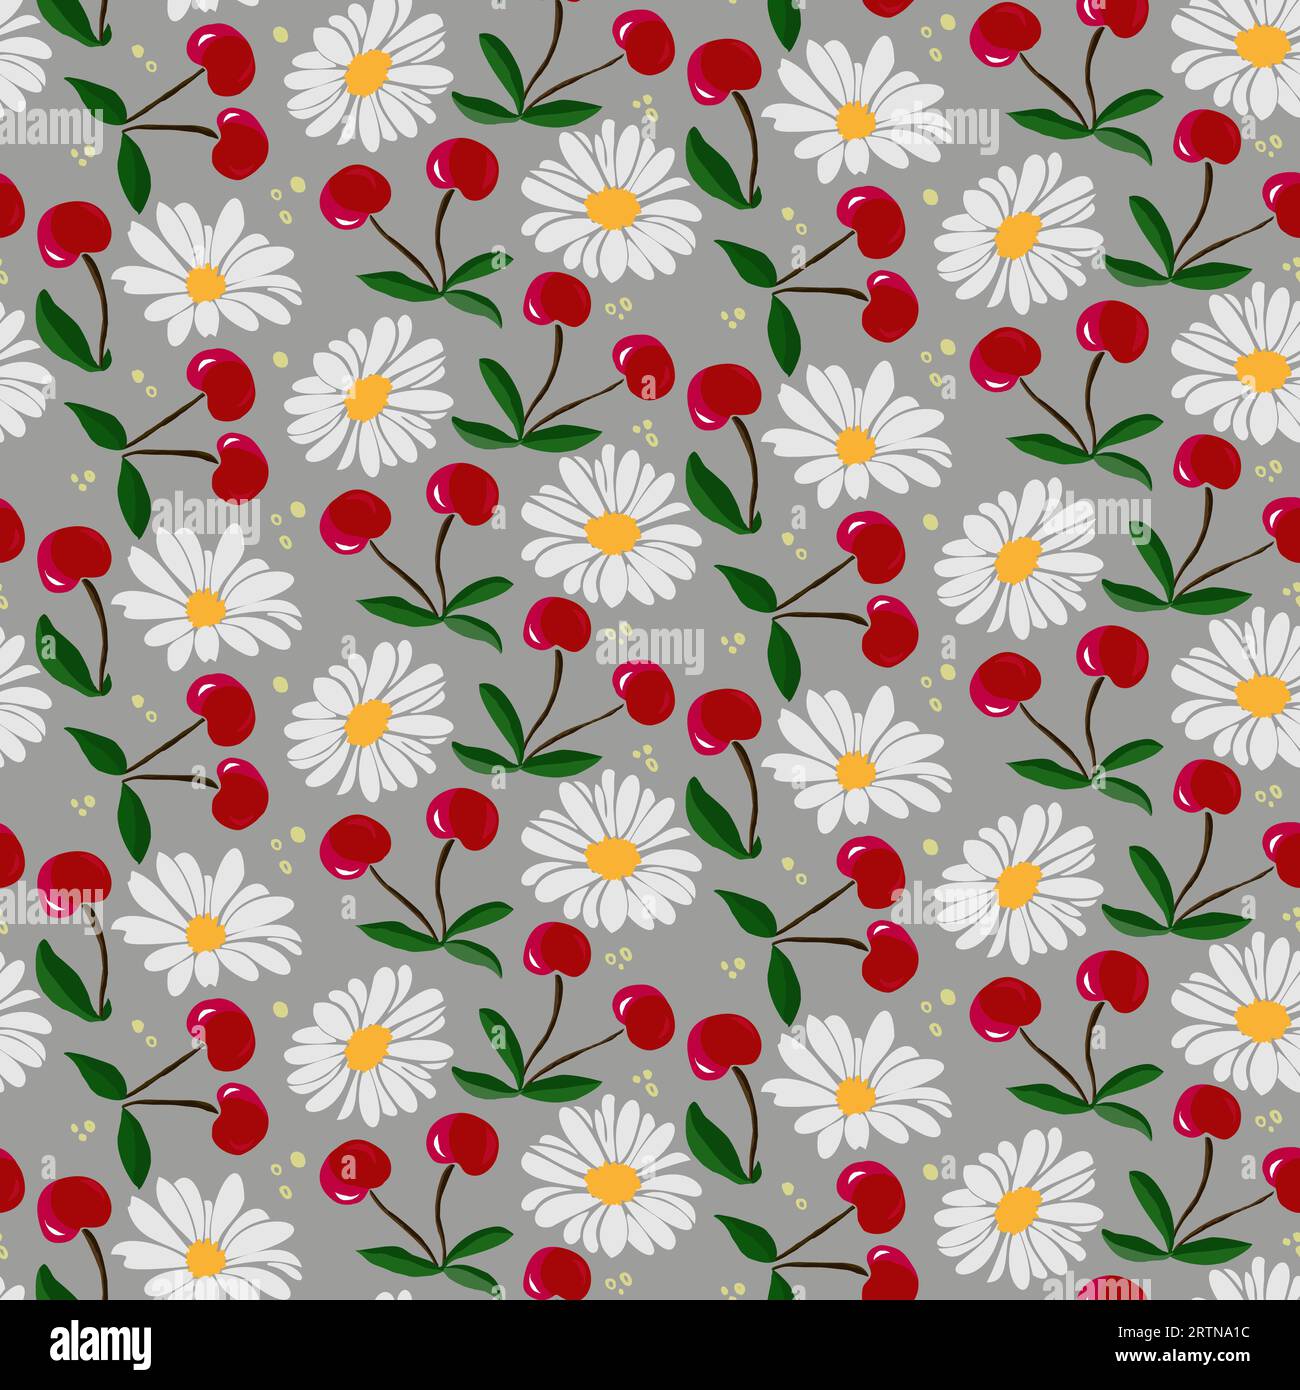 Cherry fruit and daisy flower design textile or wallpaper. Vector seamless pattern Stock Vector